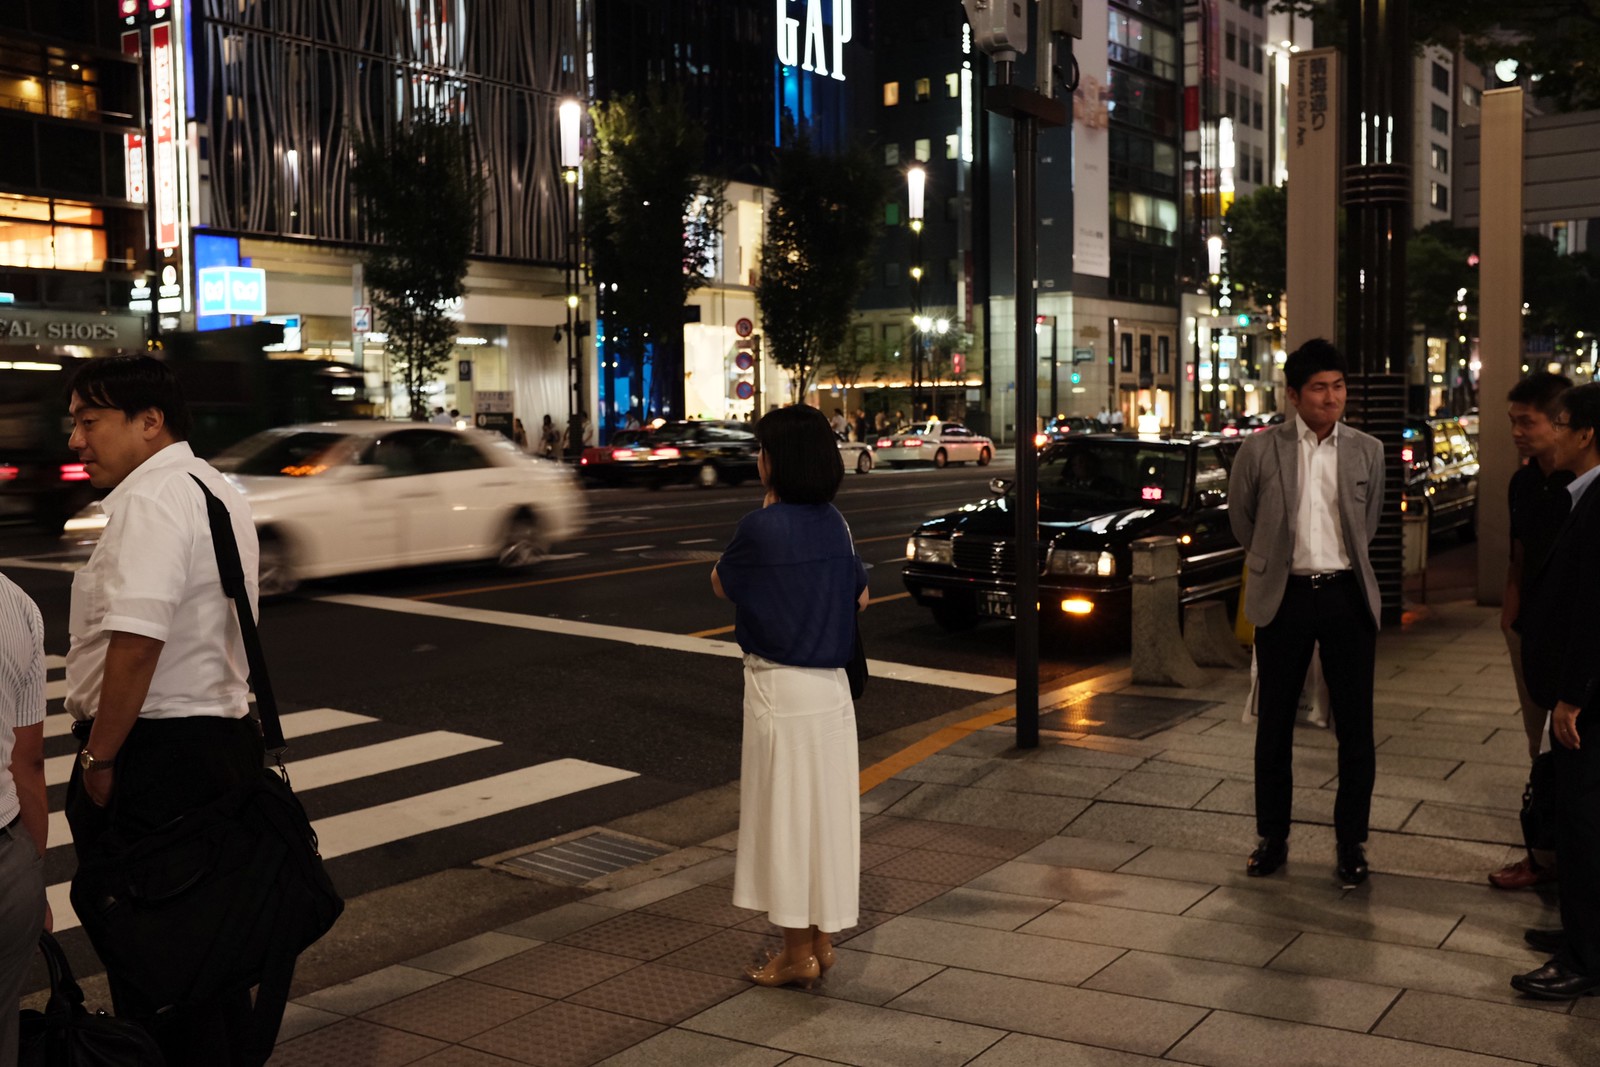 The Ginza night photo in Tokyo, Japan.